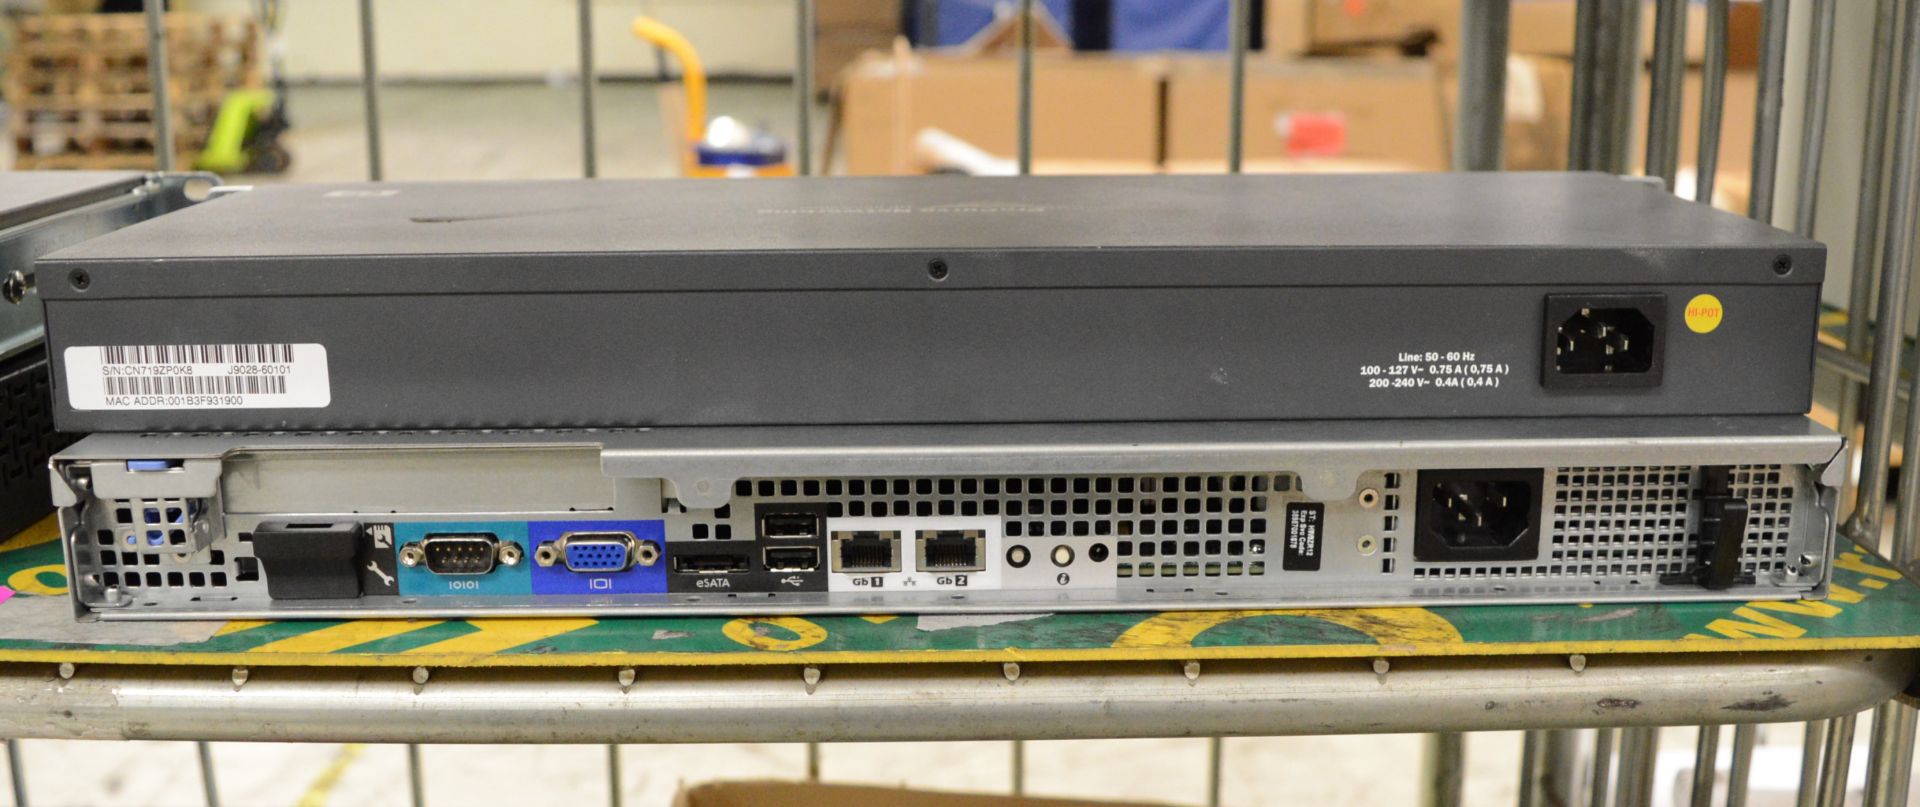 Network Hubs - Cisco Systems Catalyst 2950, HP KVM Switch, HP ProCurve Switch 1800-24G, De - Image 5 of 5